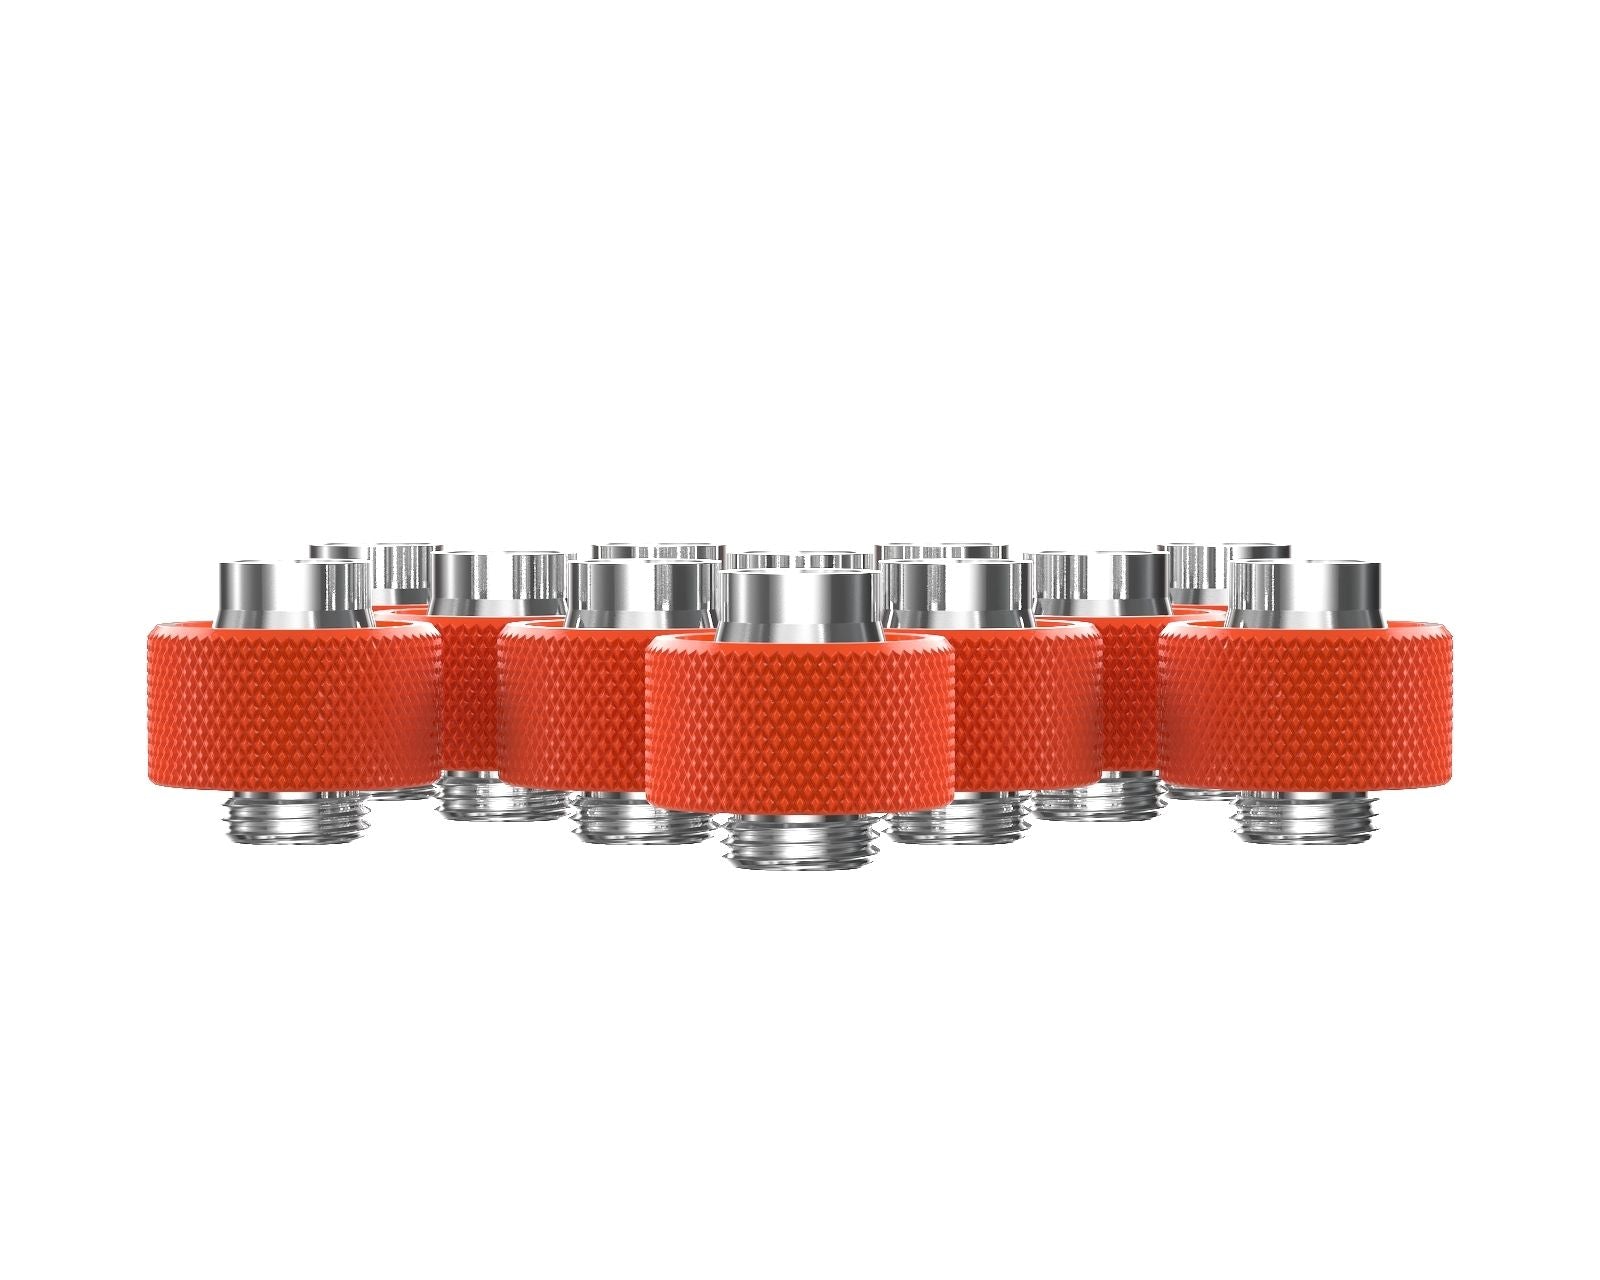 PrimoChill SecureFit SX - Premium Compression Fittings 12 Pack - For 1/2in ID x 3/4in OD Flexible Tubing (F-SFSX34-12) - Available in 20+ Colors, Custom Watercooling Loop Ready - UV Orange